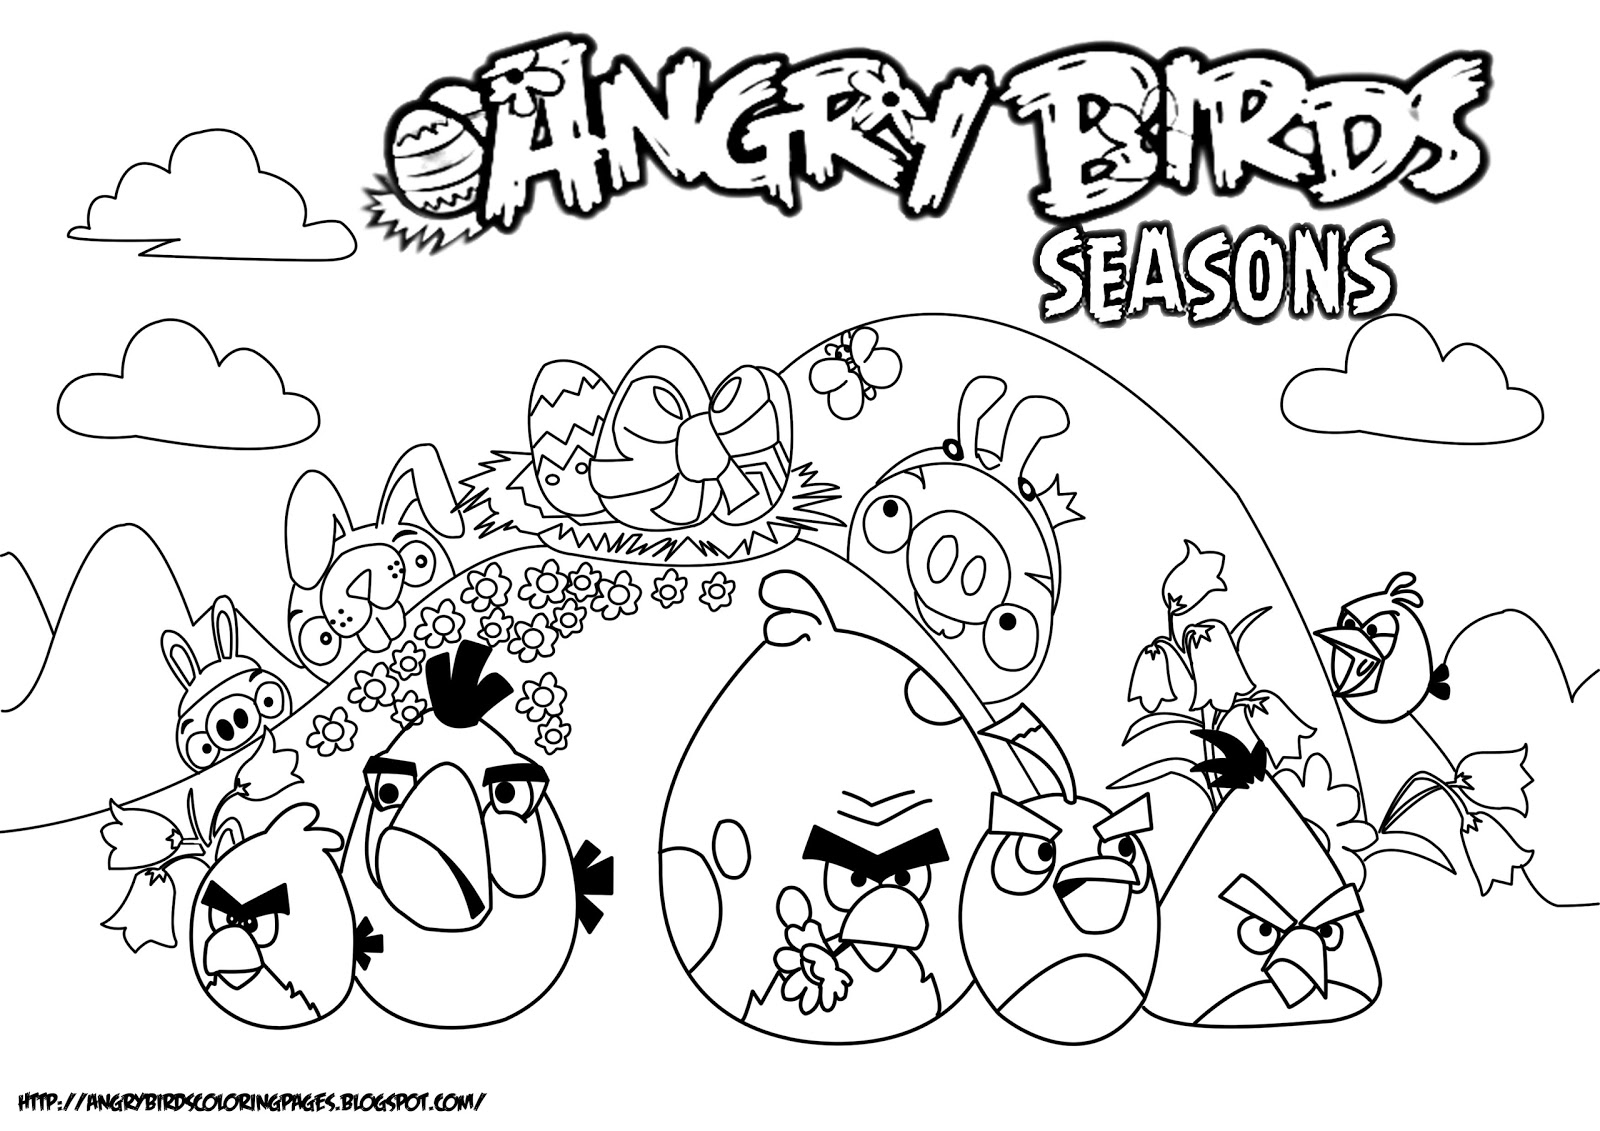 Angry Birds Images To Color